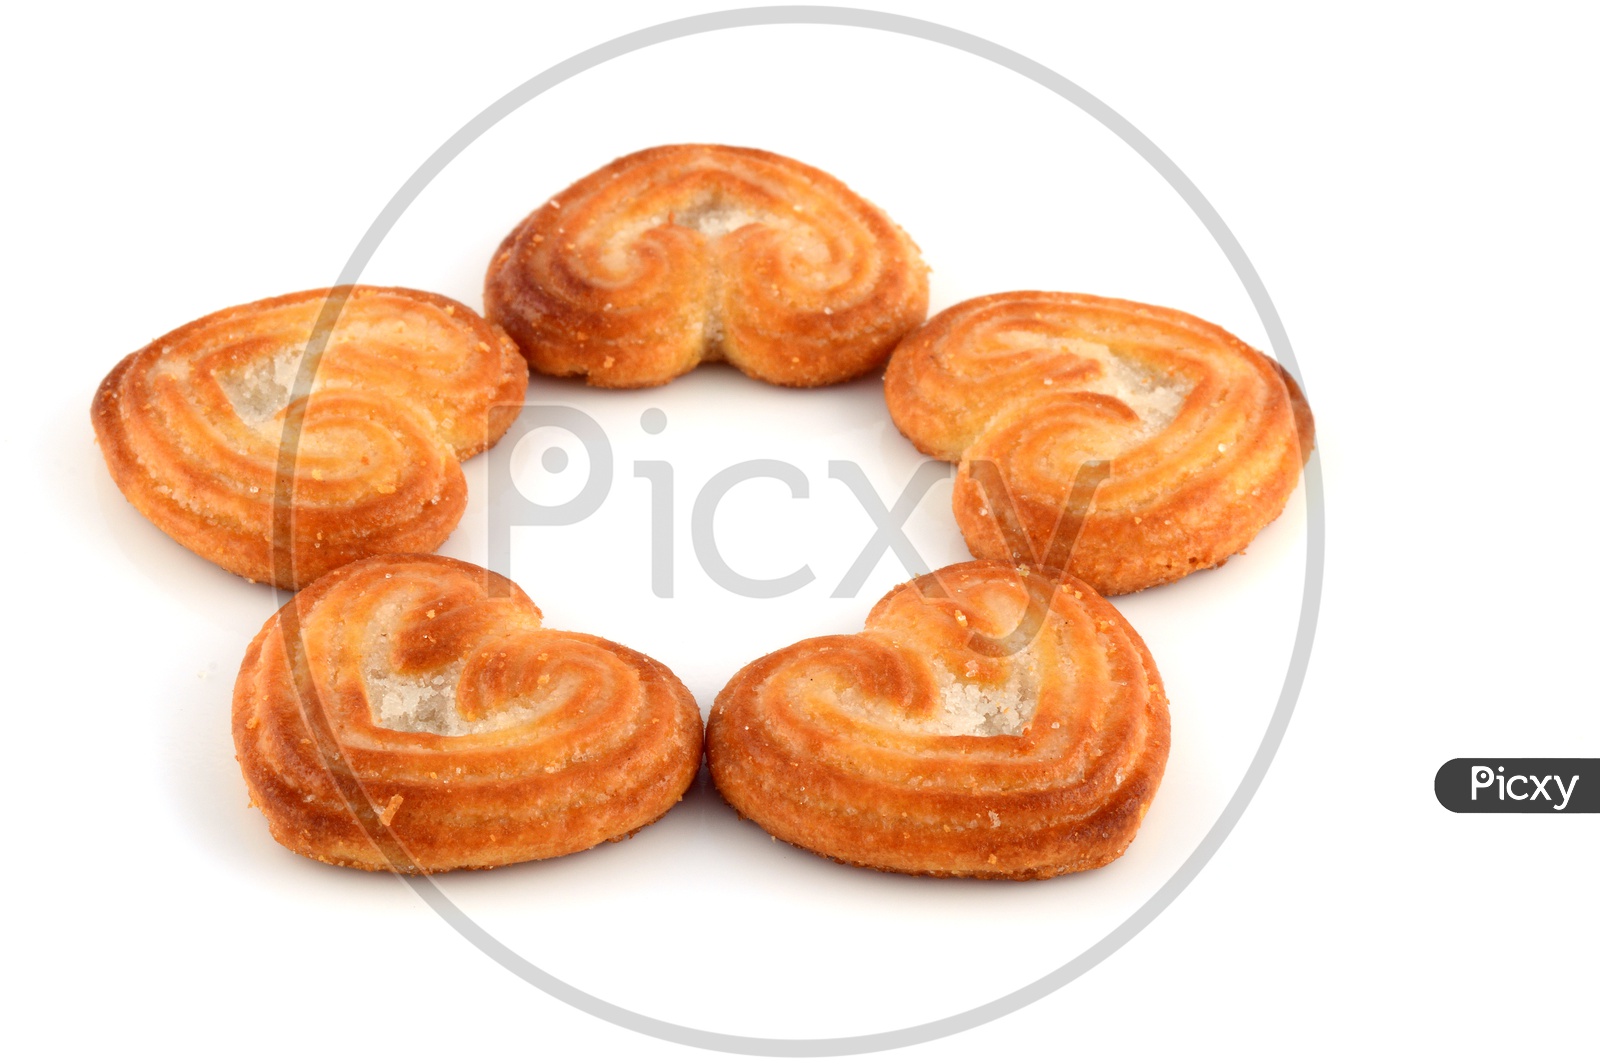 Heart shaped Biscuit (cookies) on white background